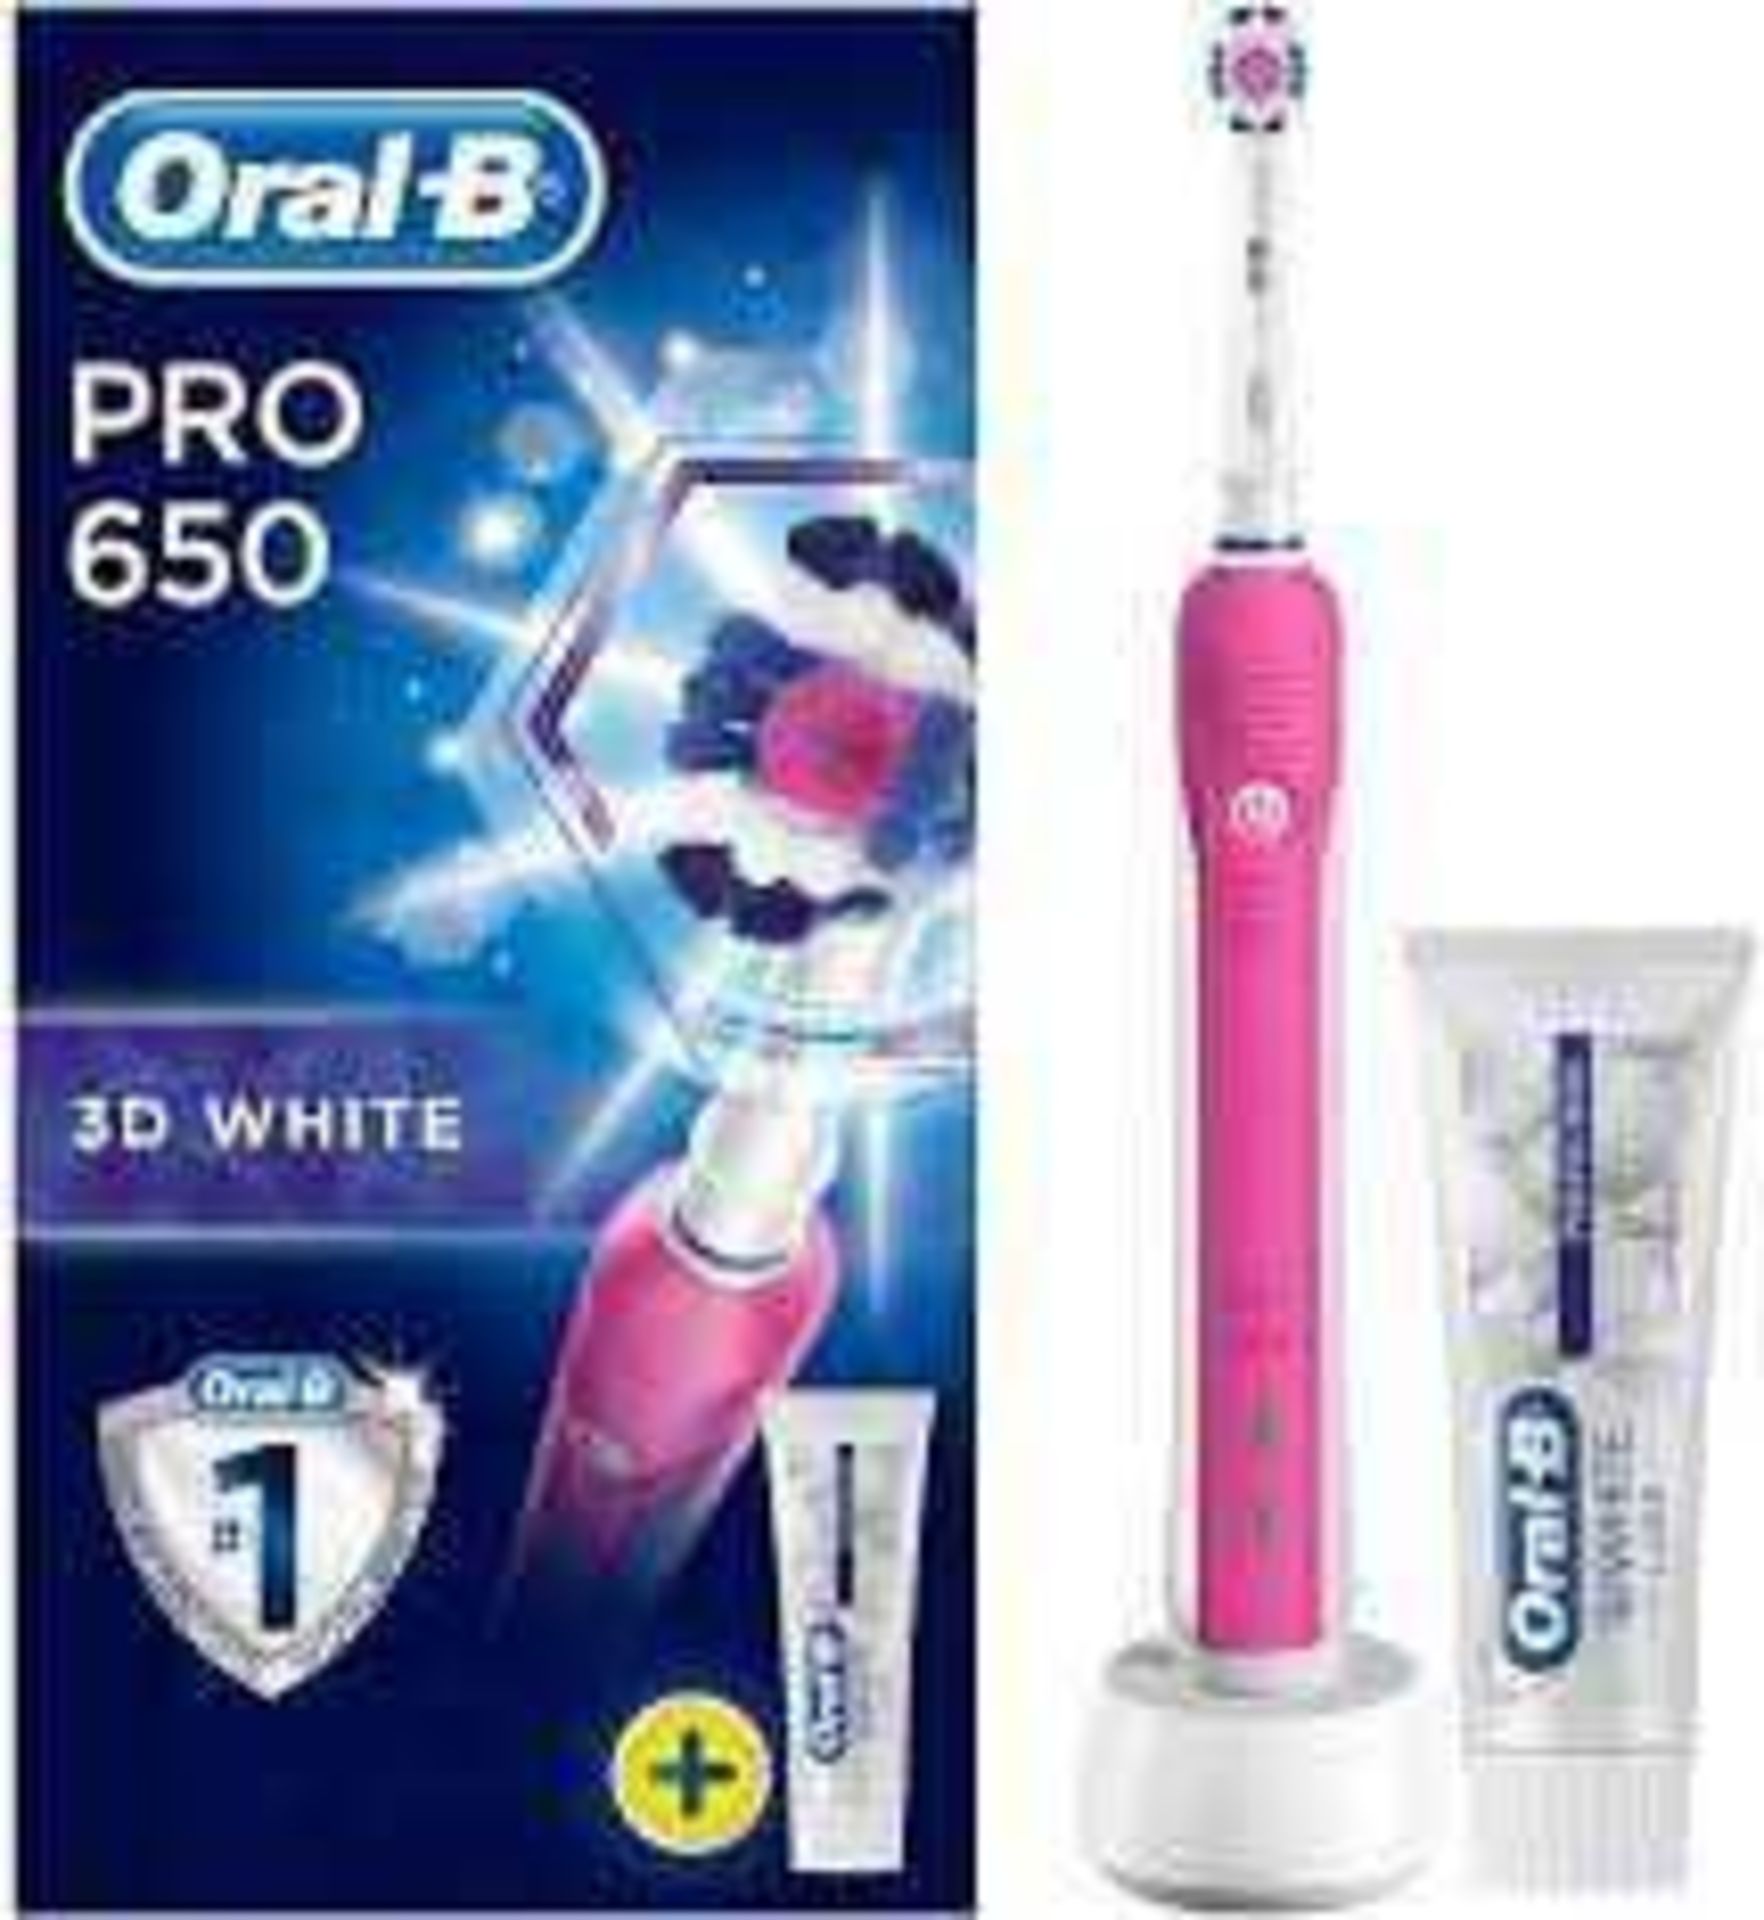 Combined RRP £140 Lot To Contain Two Boxed Oral B Pro 650 Electric Toothbrushes